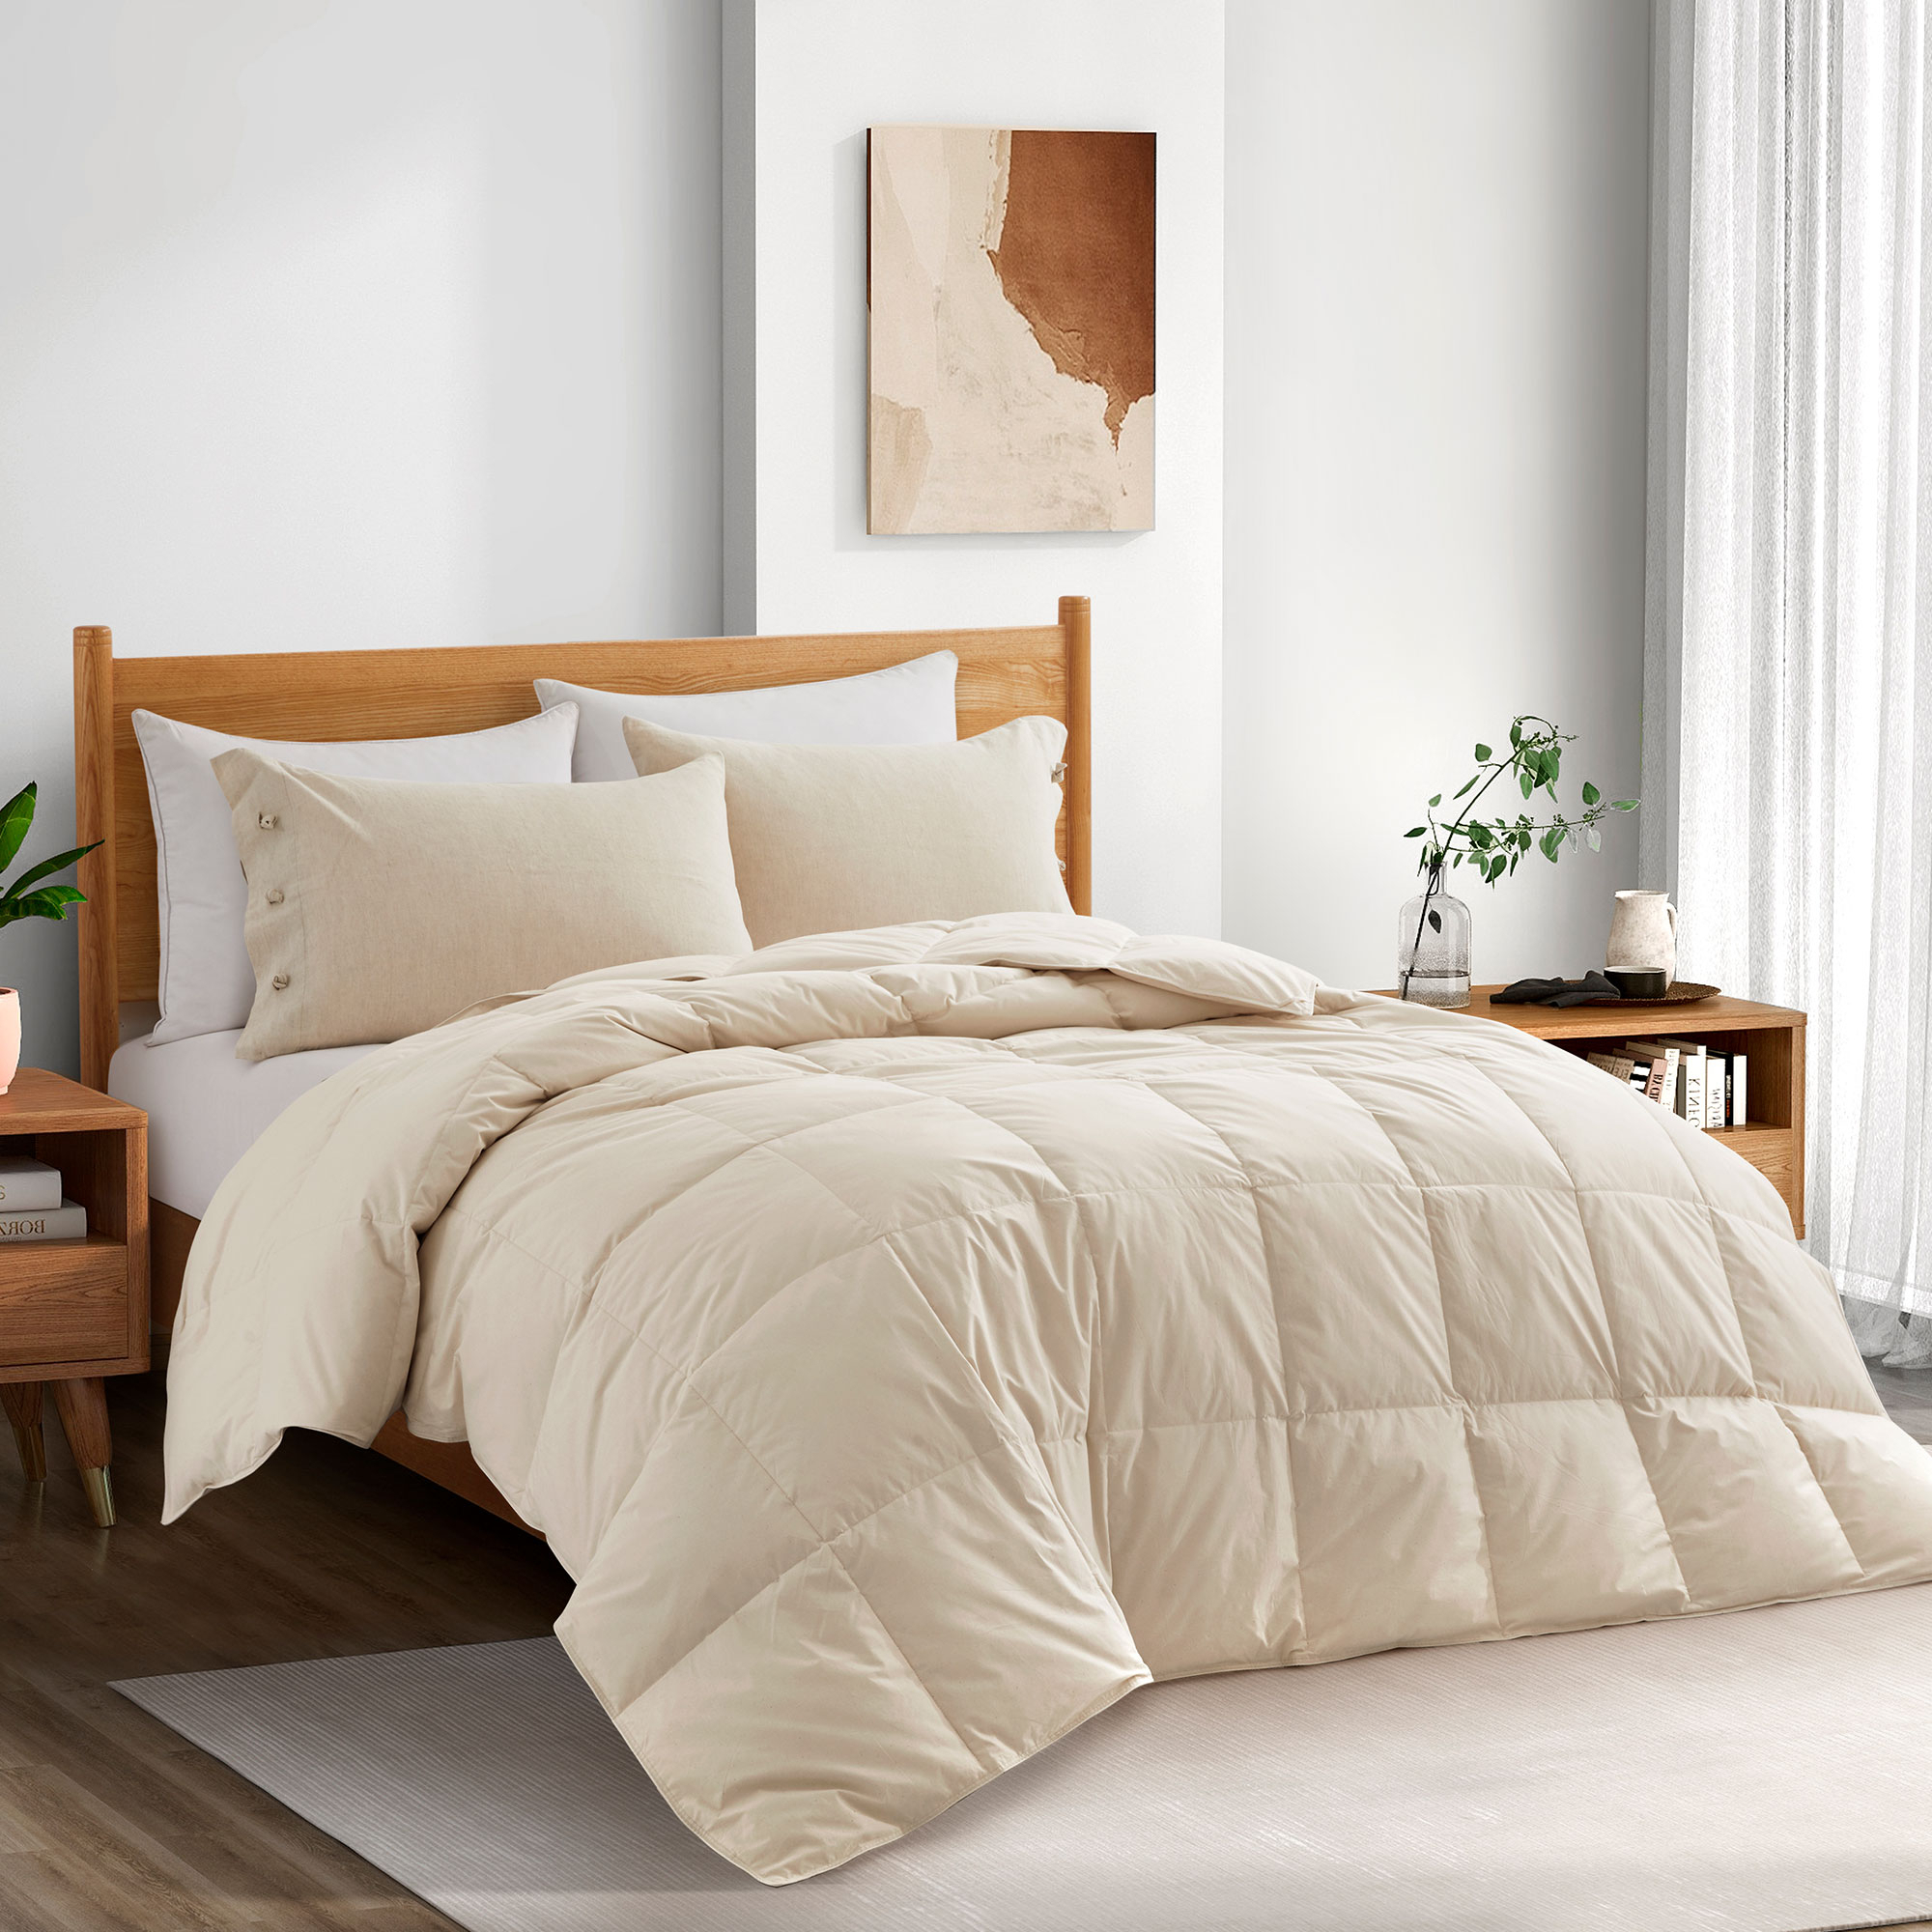 All Season Organic Cotton Comforter Filled With Down And Feather Fiber - Off White, King